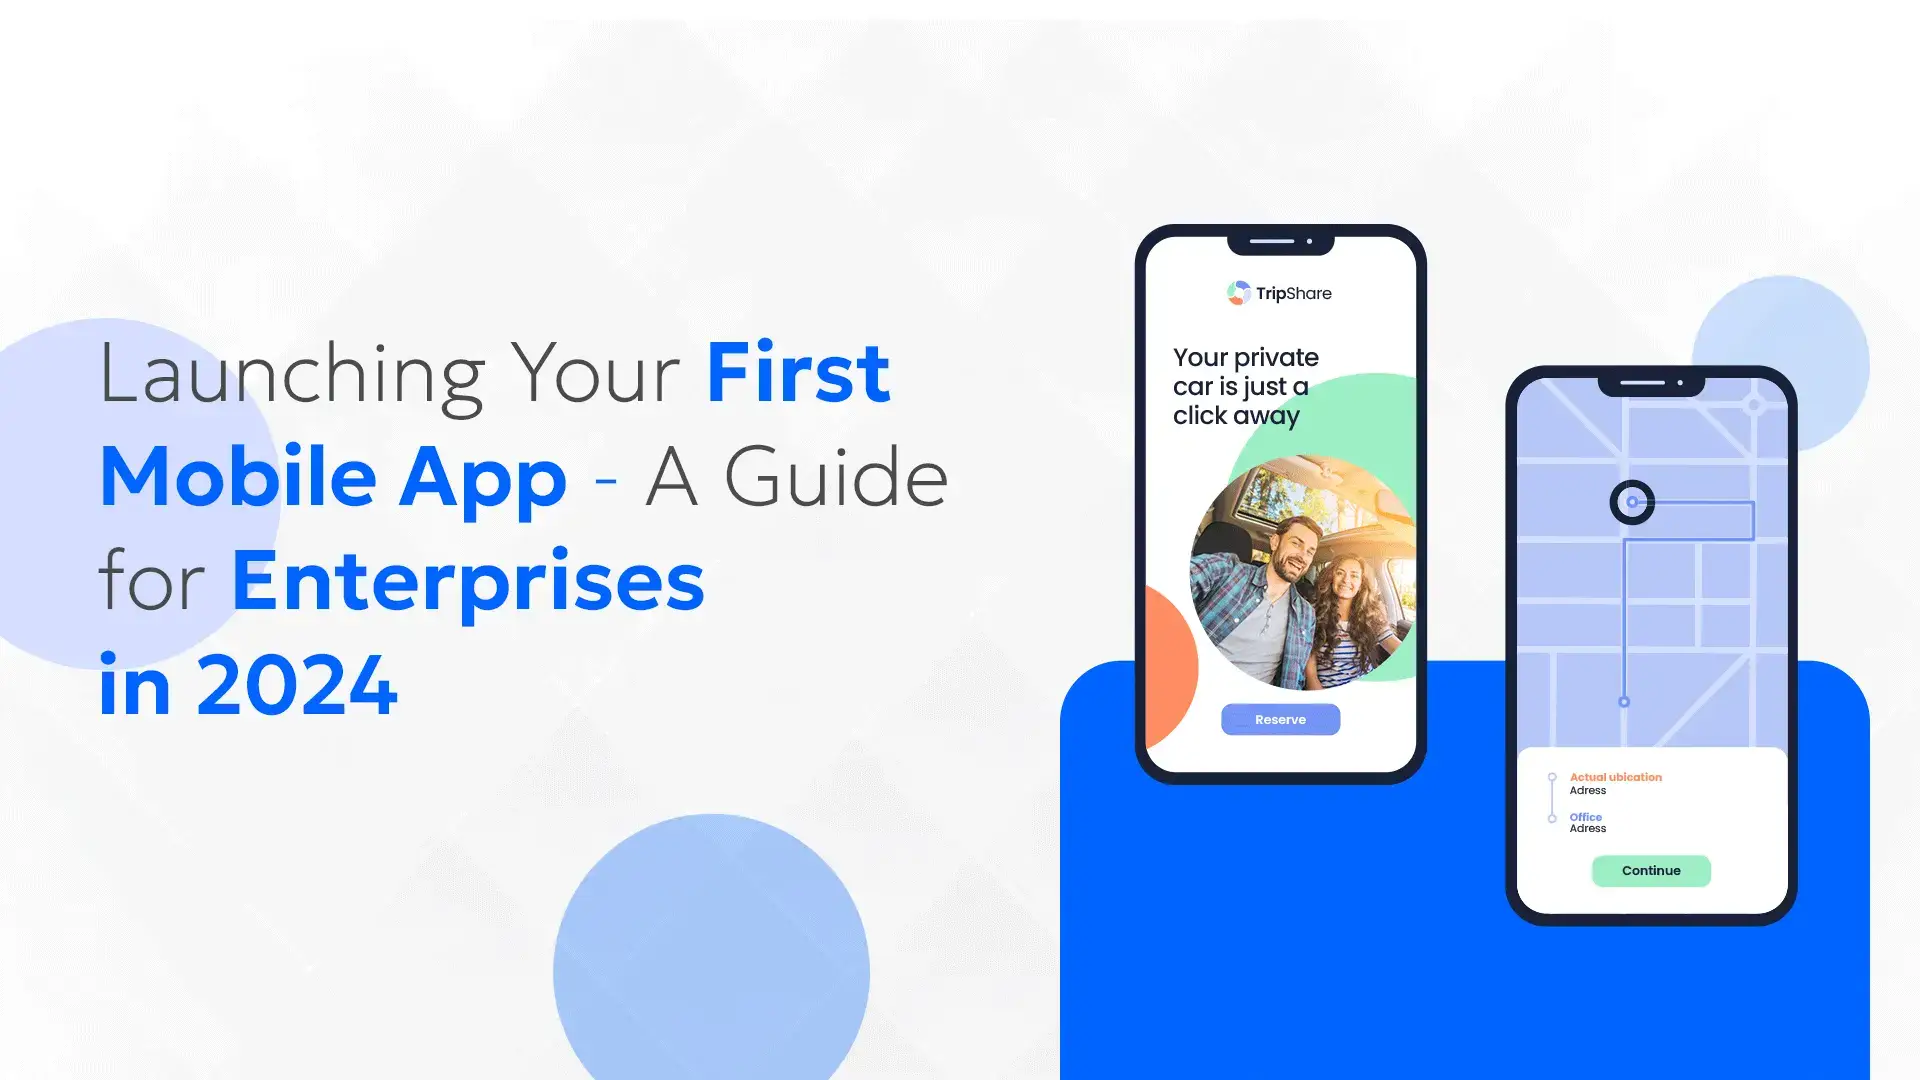 Launching Your First Mobile App - A Guide for Enterprises in 2024